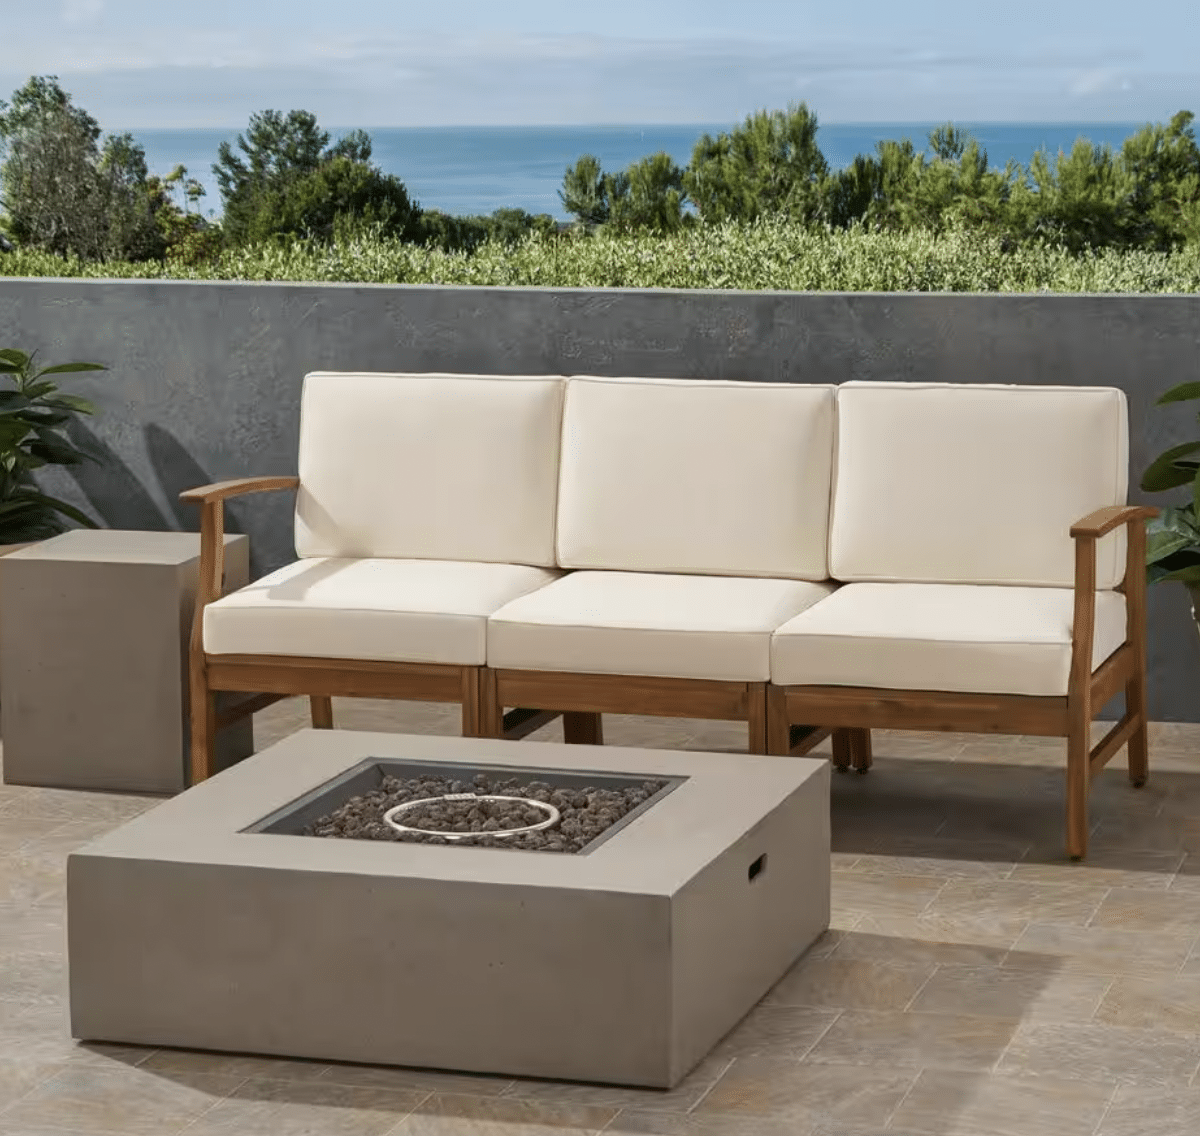 Outdoor sofa with fire pit table set for under $1000